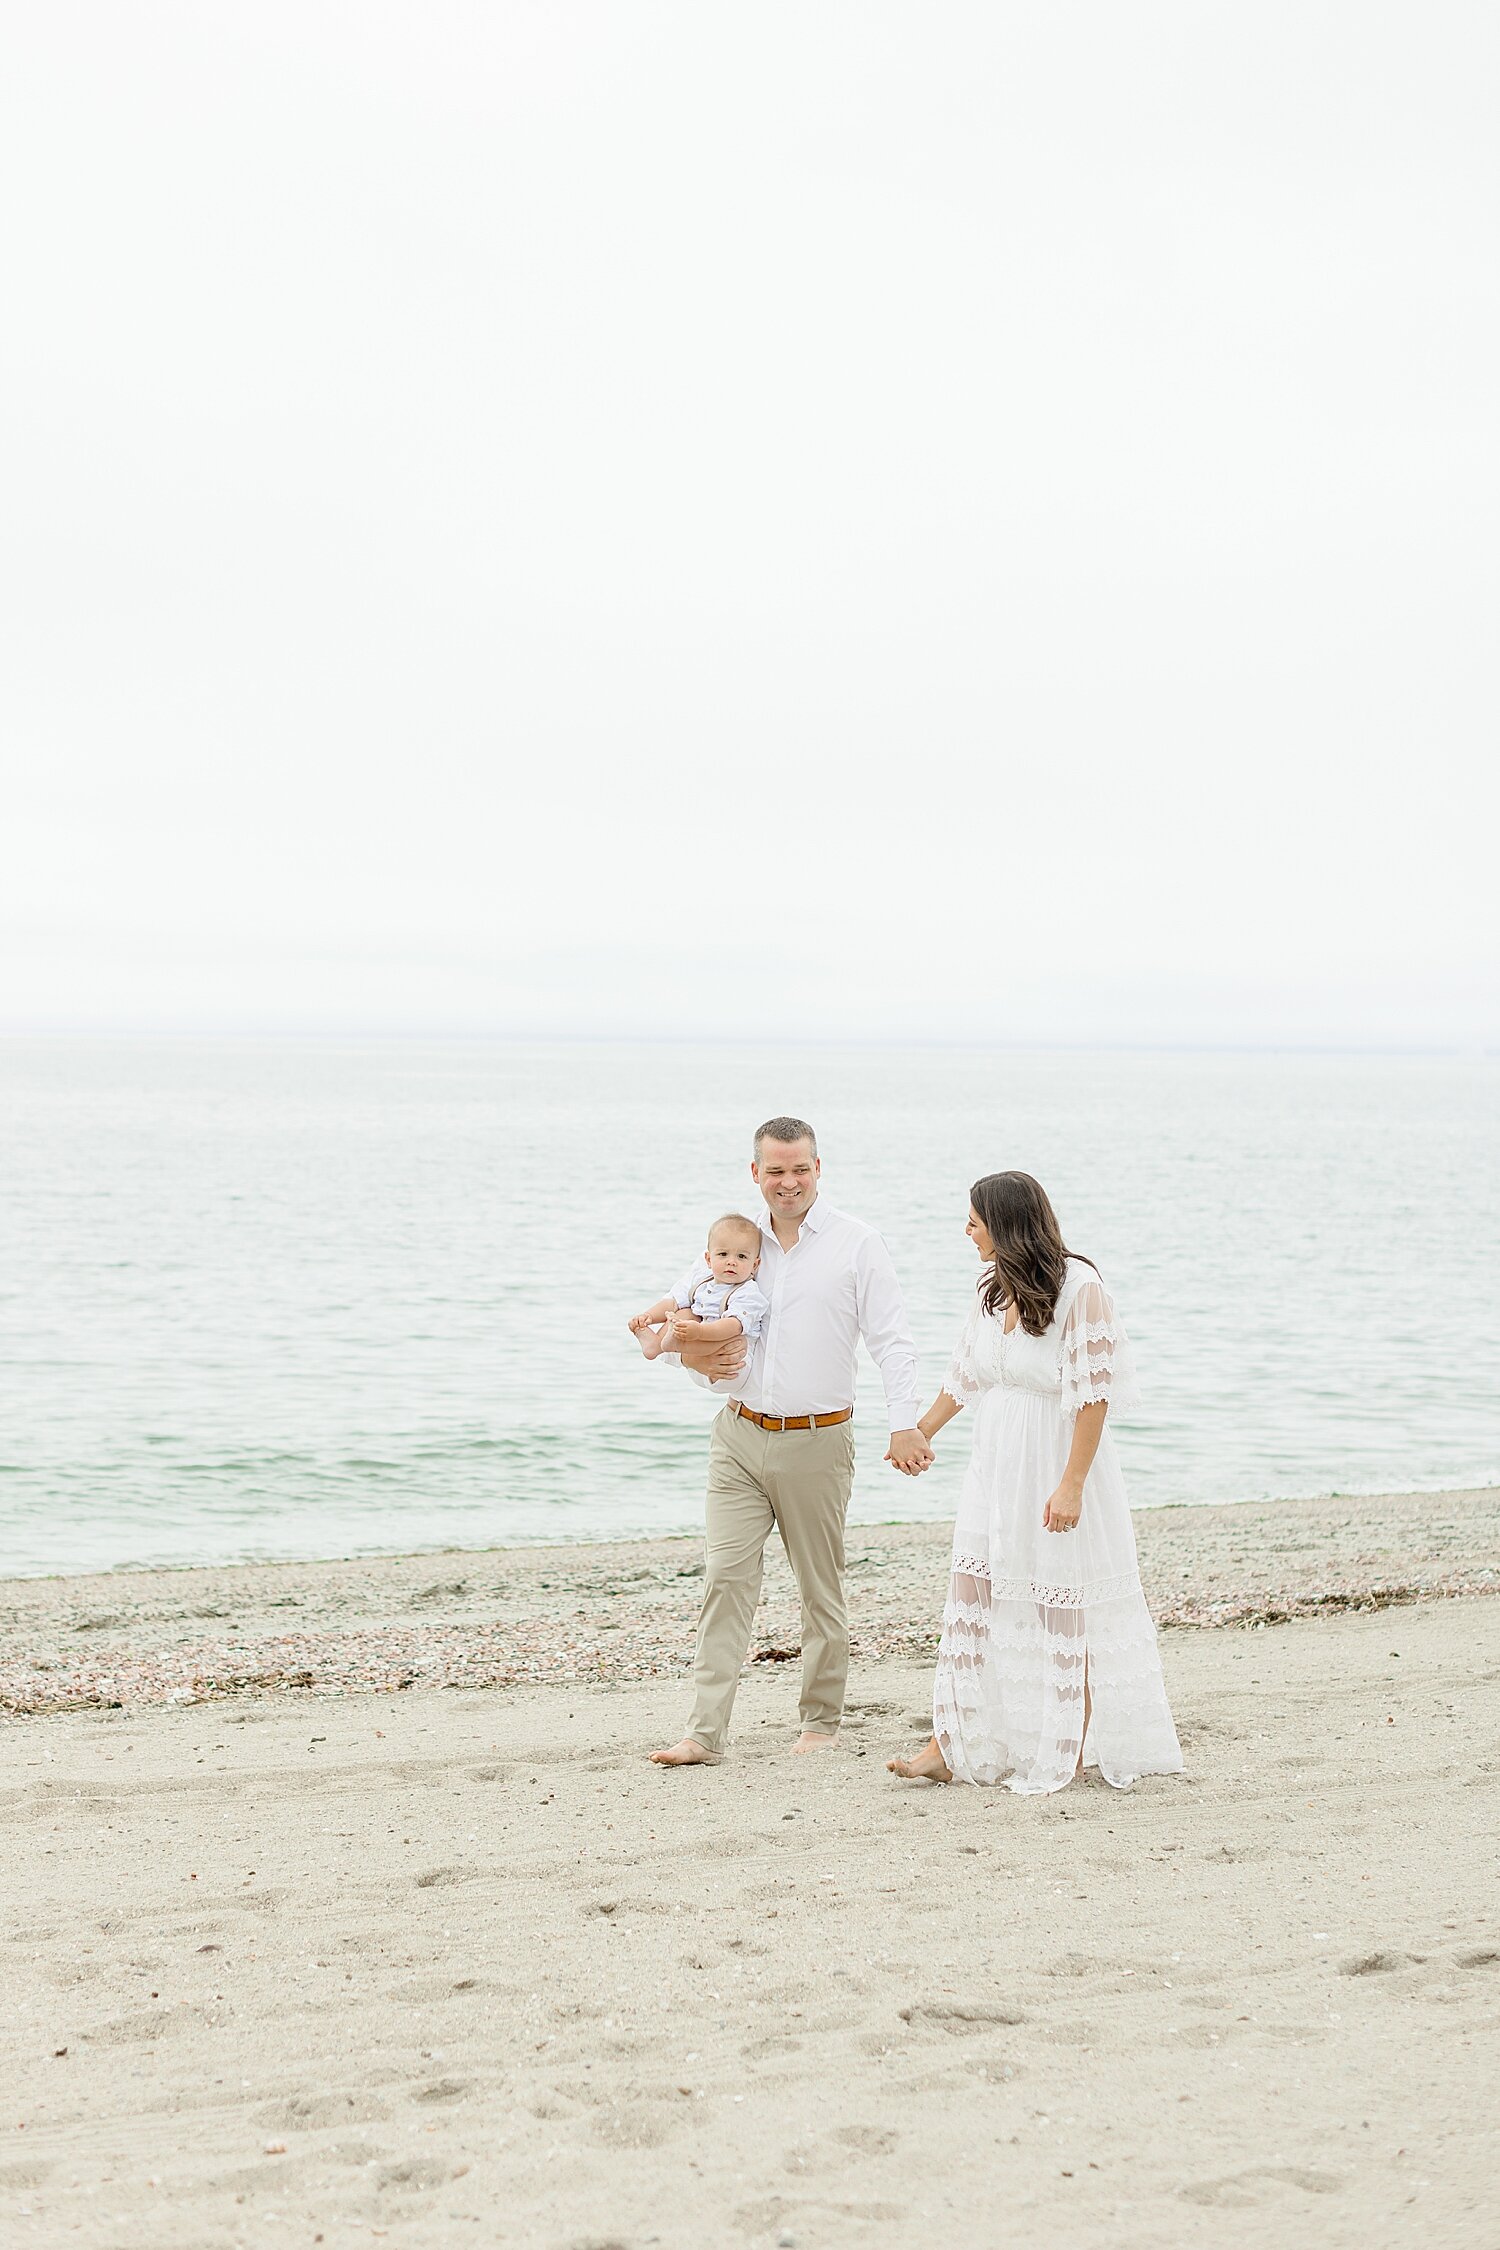 Parents walking along the beach with their son | Kristin Wood Photography